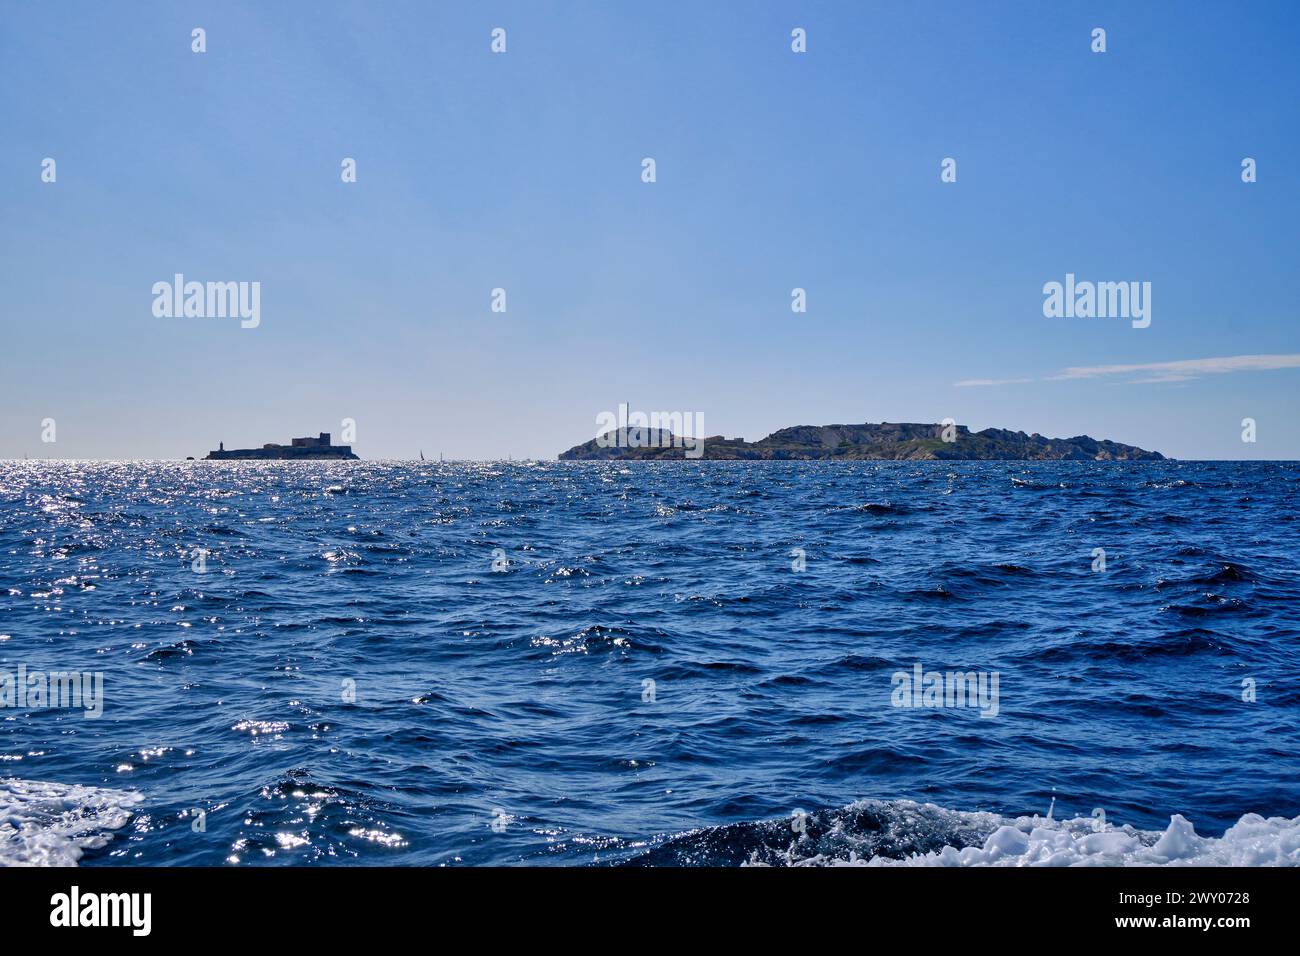 The Frioul Islands and the If Castle island. Mediterranean Sea, Marseille. France Stock Photo